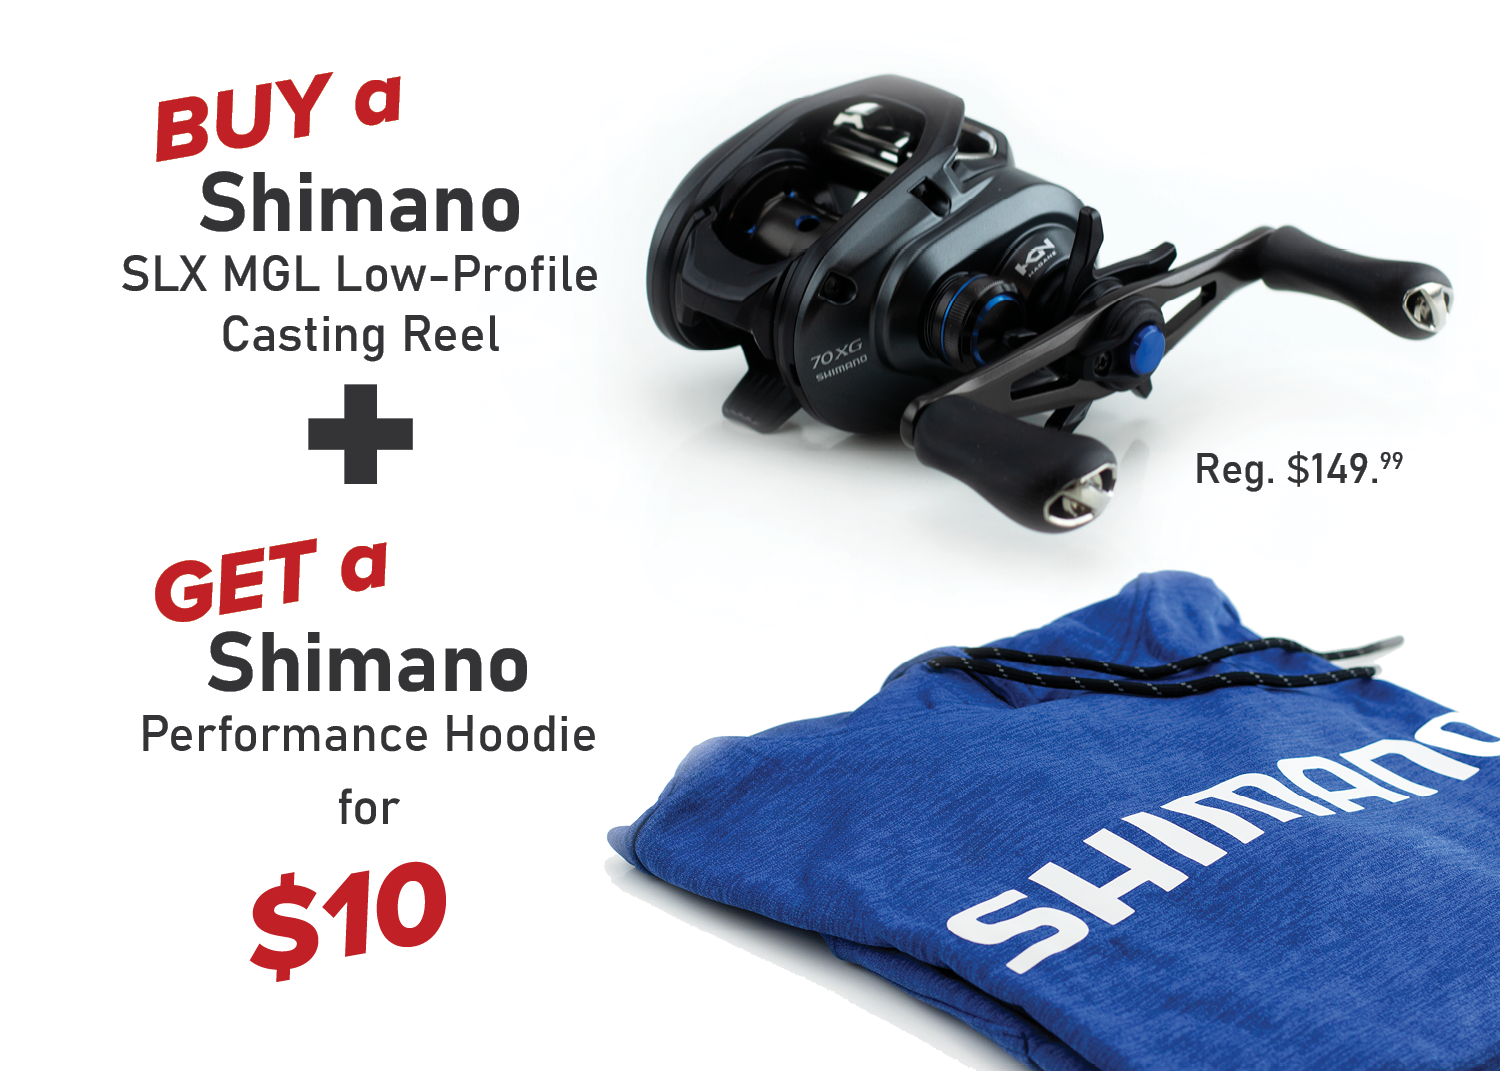 Buy a Shimano SLX MGL Low-Profile Casting Reel & Get a Shimano Performance Hoodie for ONLY $10